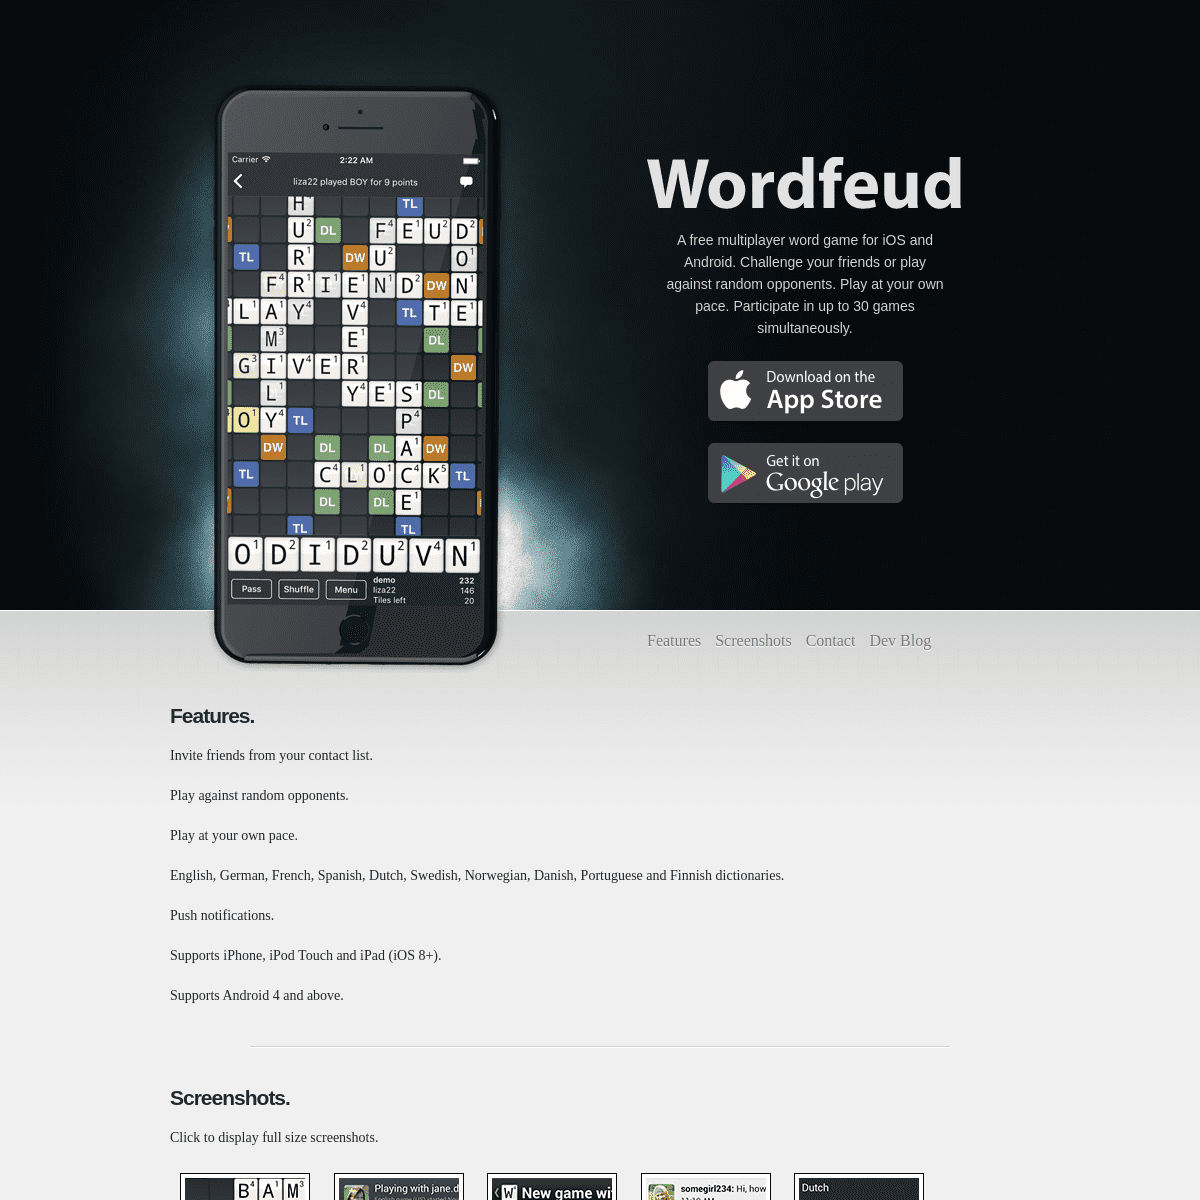 A complete backup of https://wordfeud.com